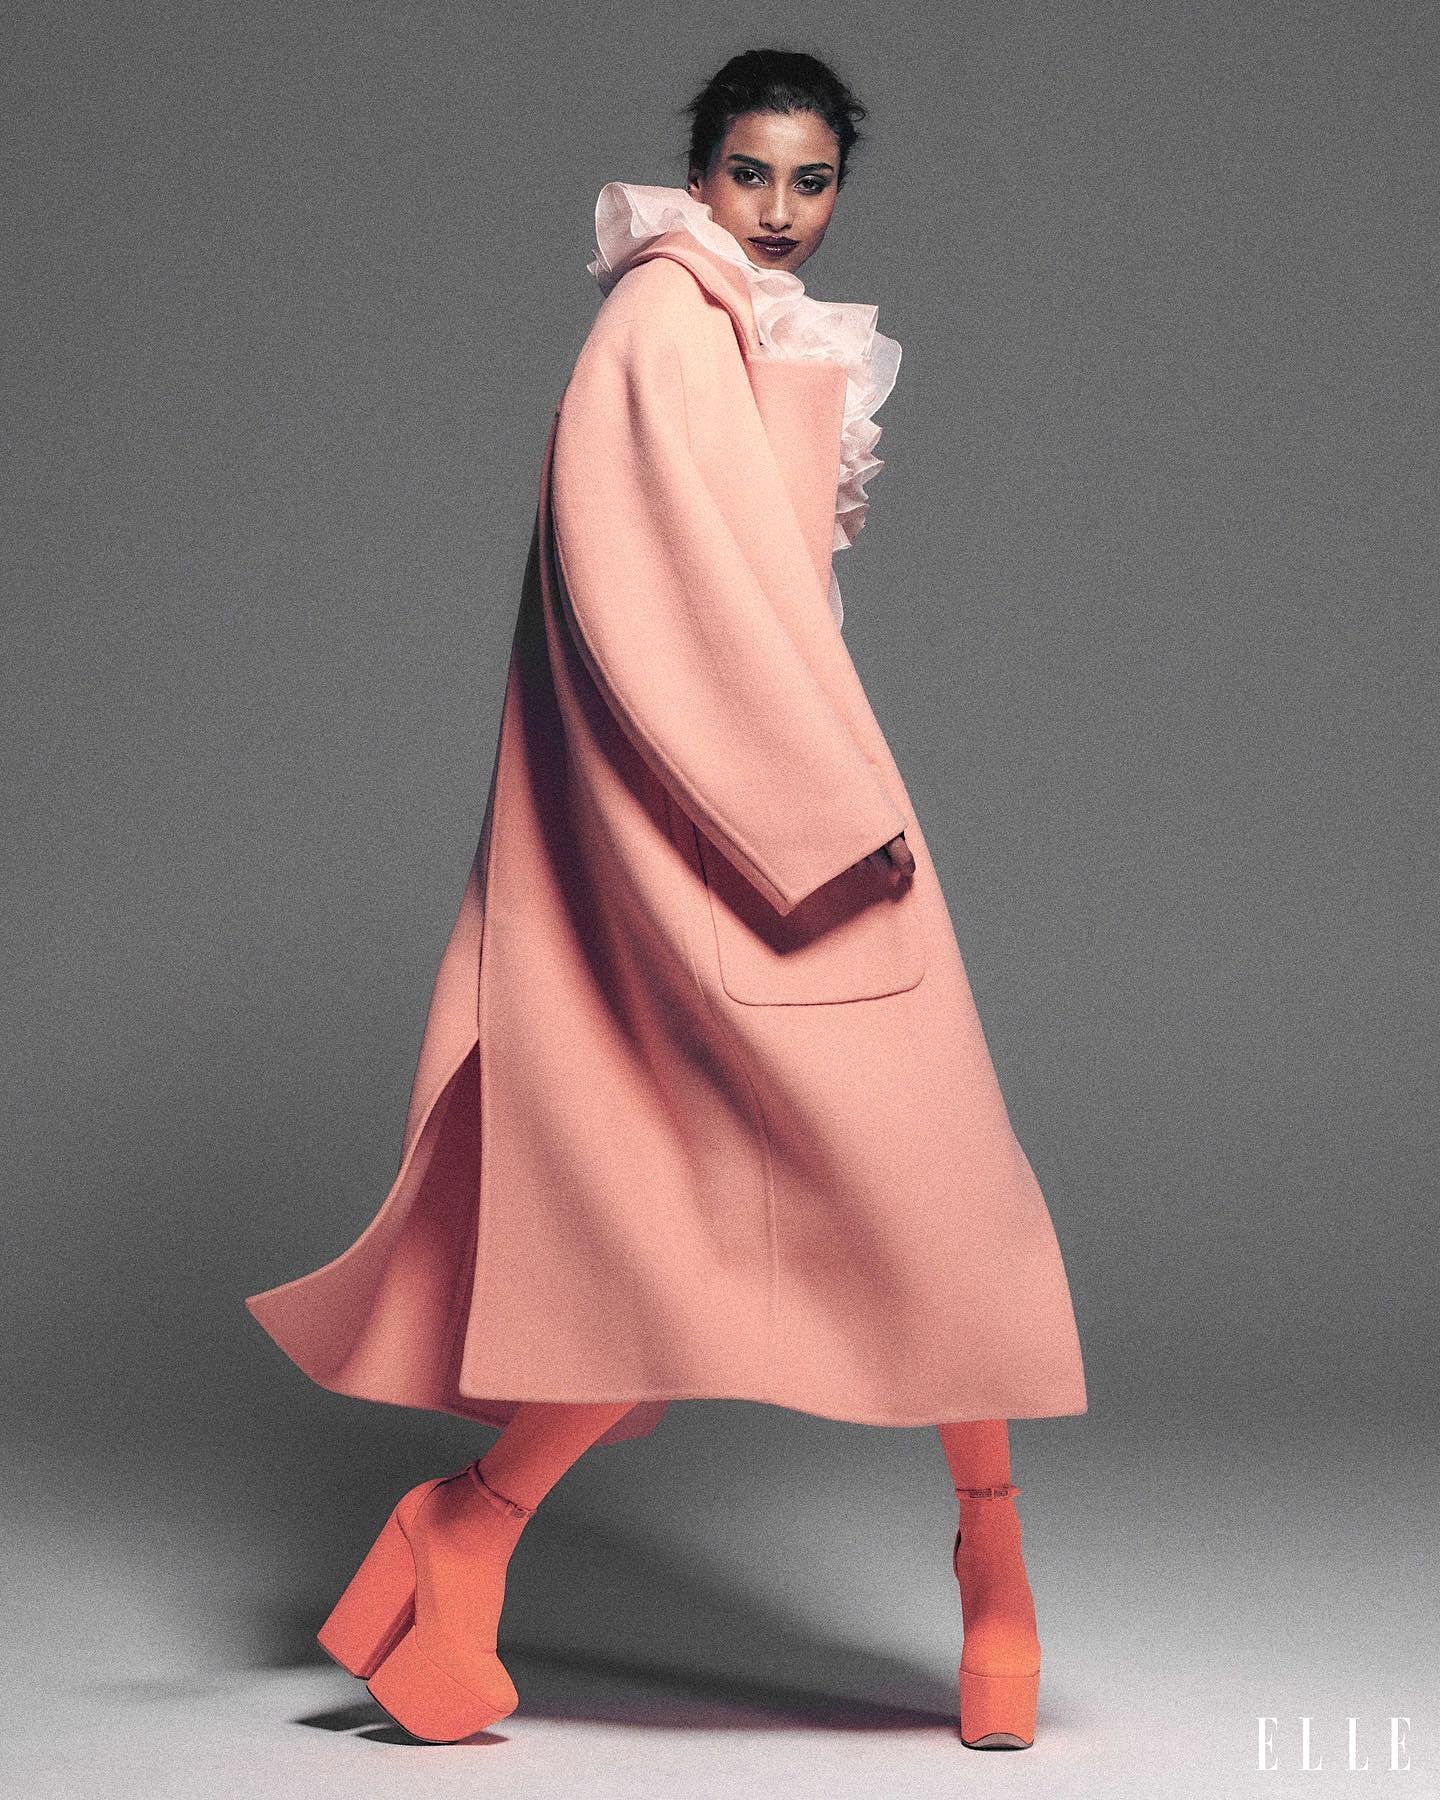 Imaan Hammam in Valentino Couture dress, coat, tights, pumps by Chris Colls ELLE USA August 2023